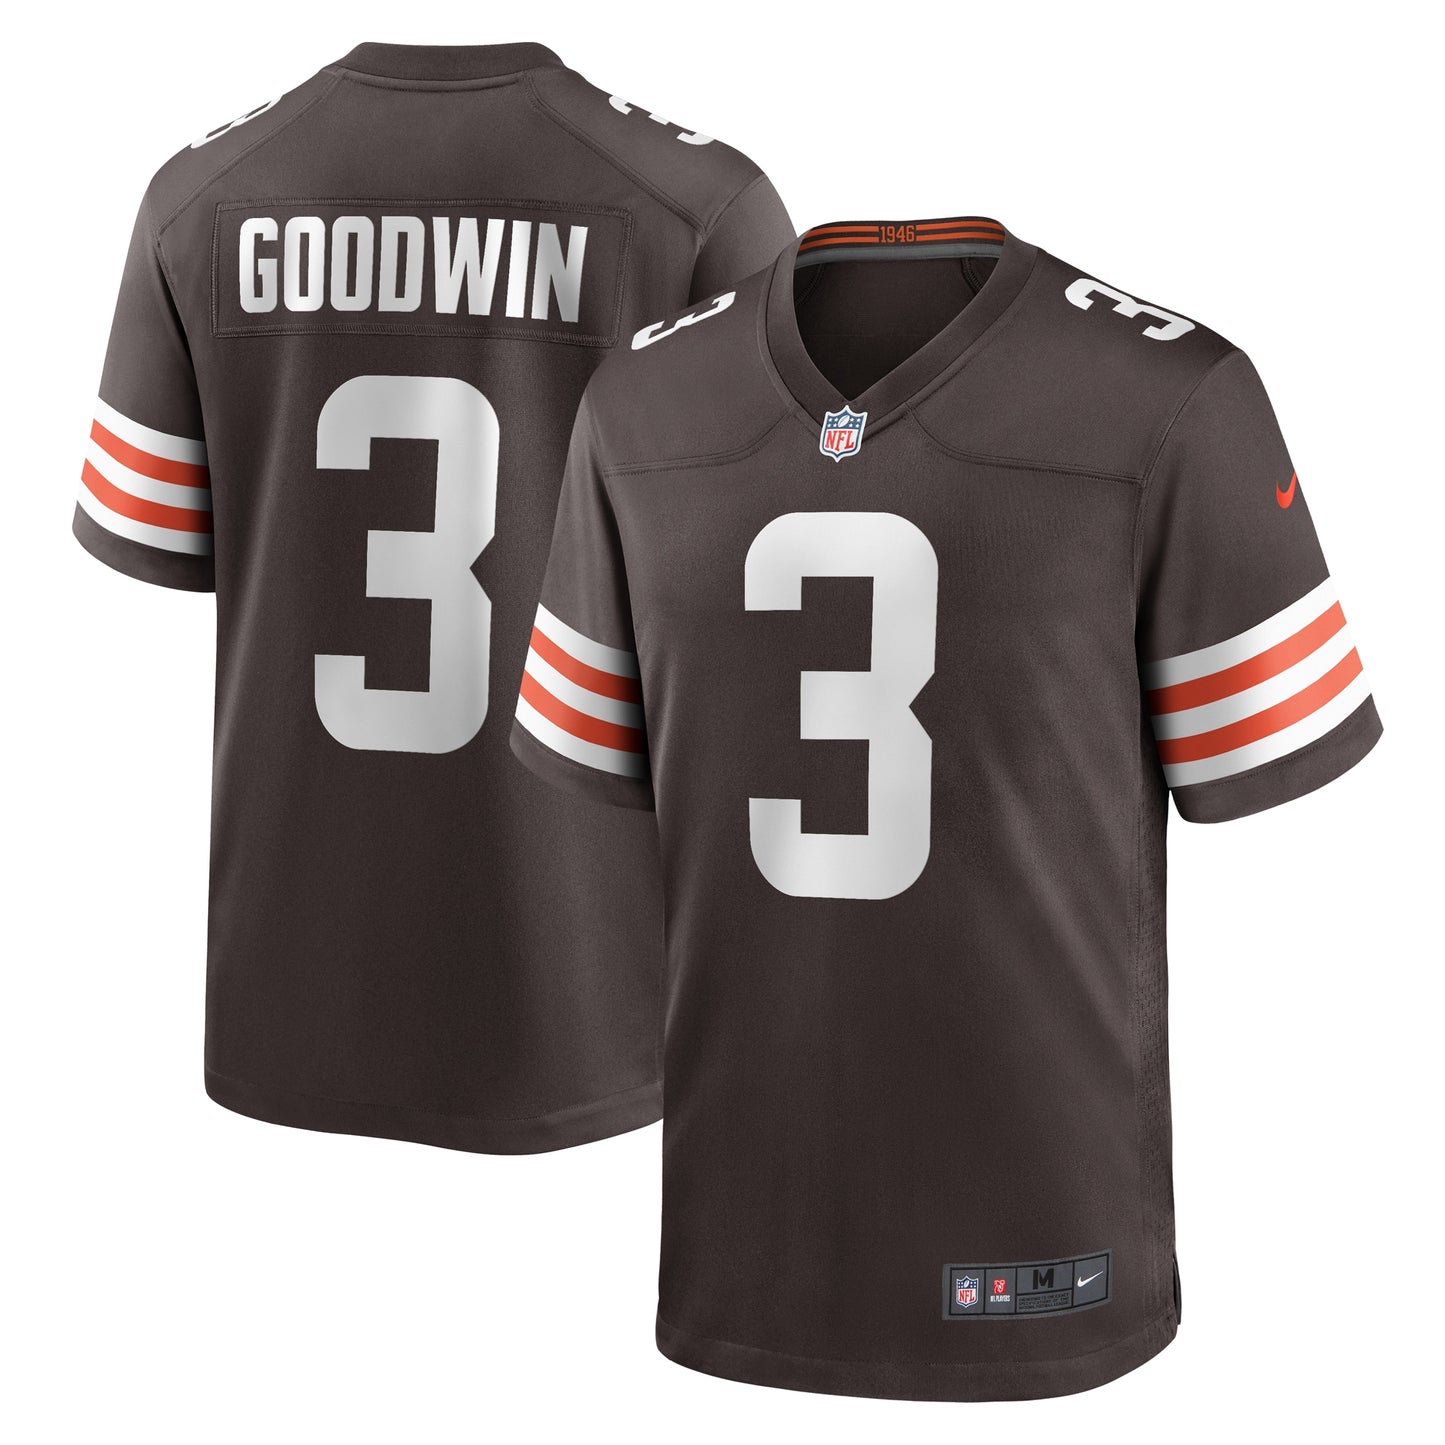 Marquise Goodwin Cleveland Browns Nike Team Game Jersey -  Brown